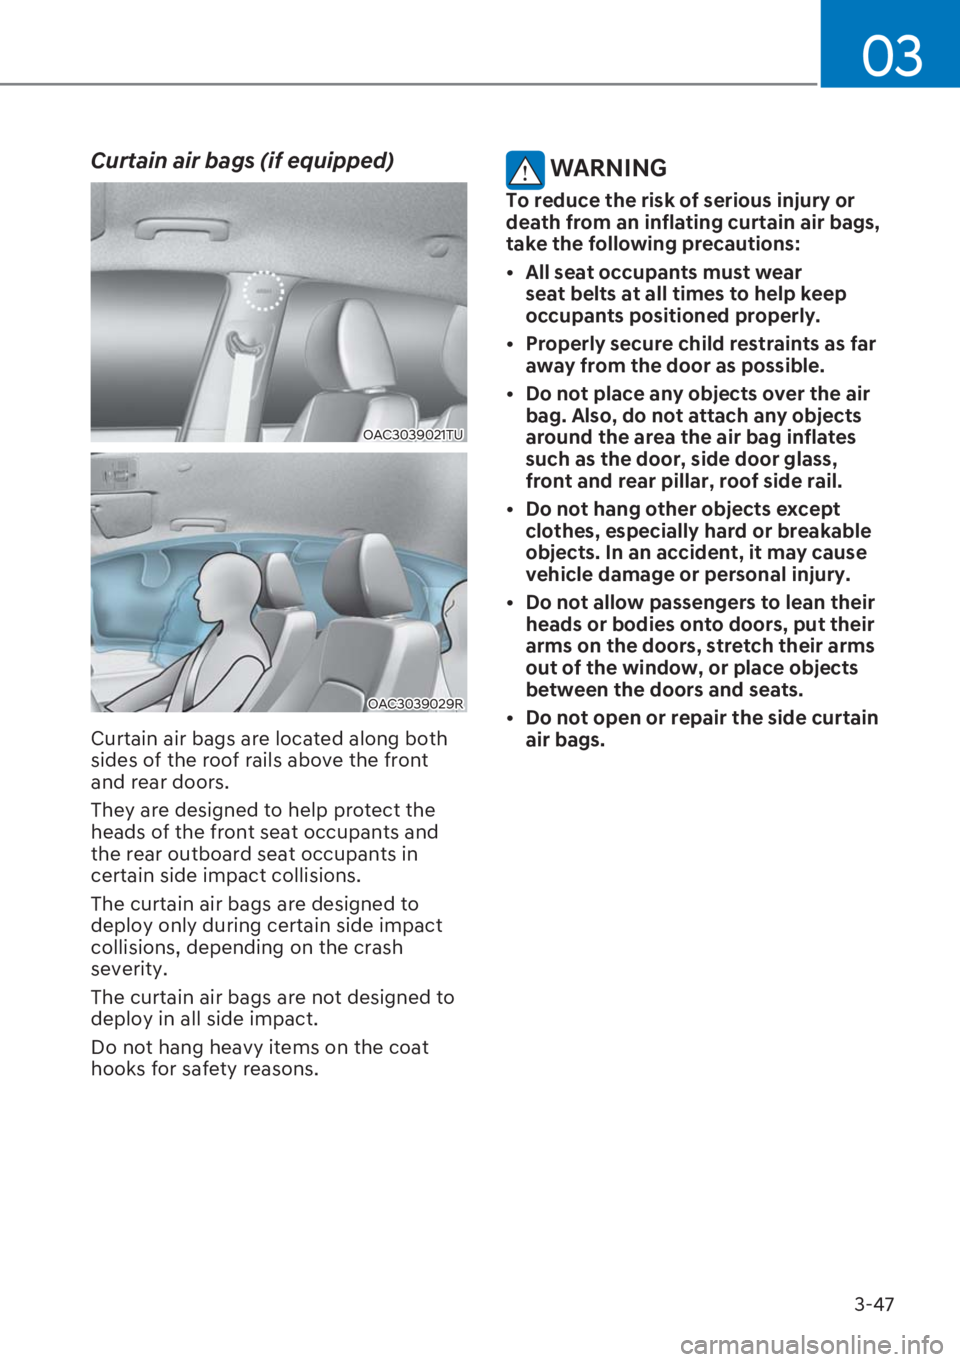 HYUNDAI I20 2023  Owners Manual 3-47
03
Curtain air bags (if equipped) 
OAC3039021TU
OAC3039029R
Curtain air bags are located along both 
sides of the roof rails above the front 
and rear doors.
They are designed to help protect the